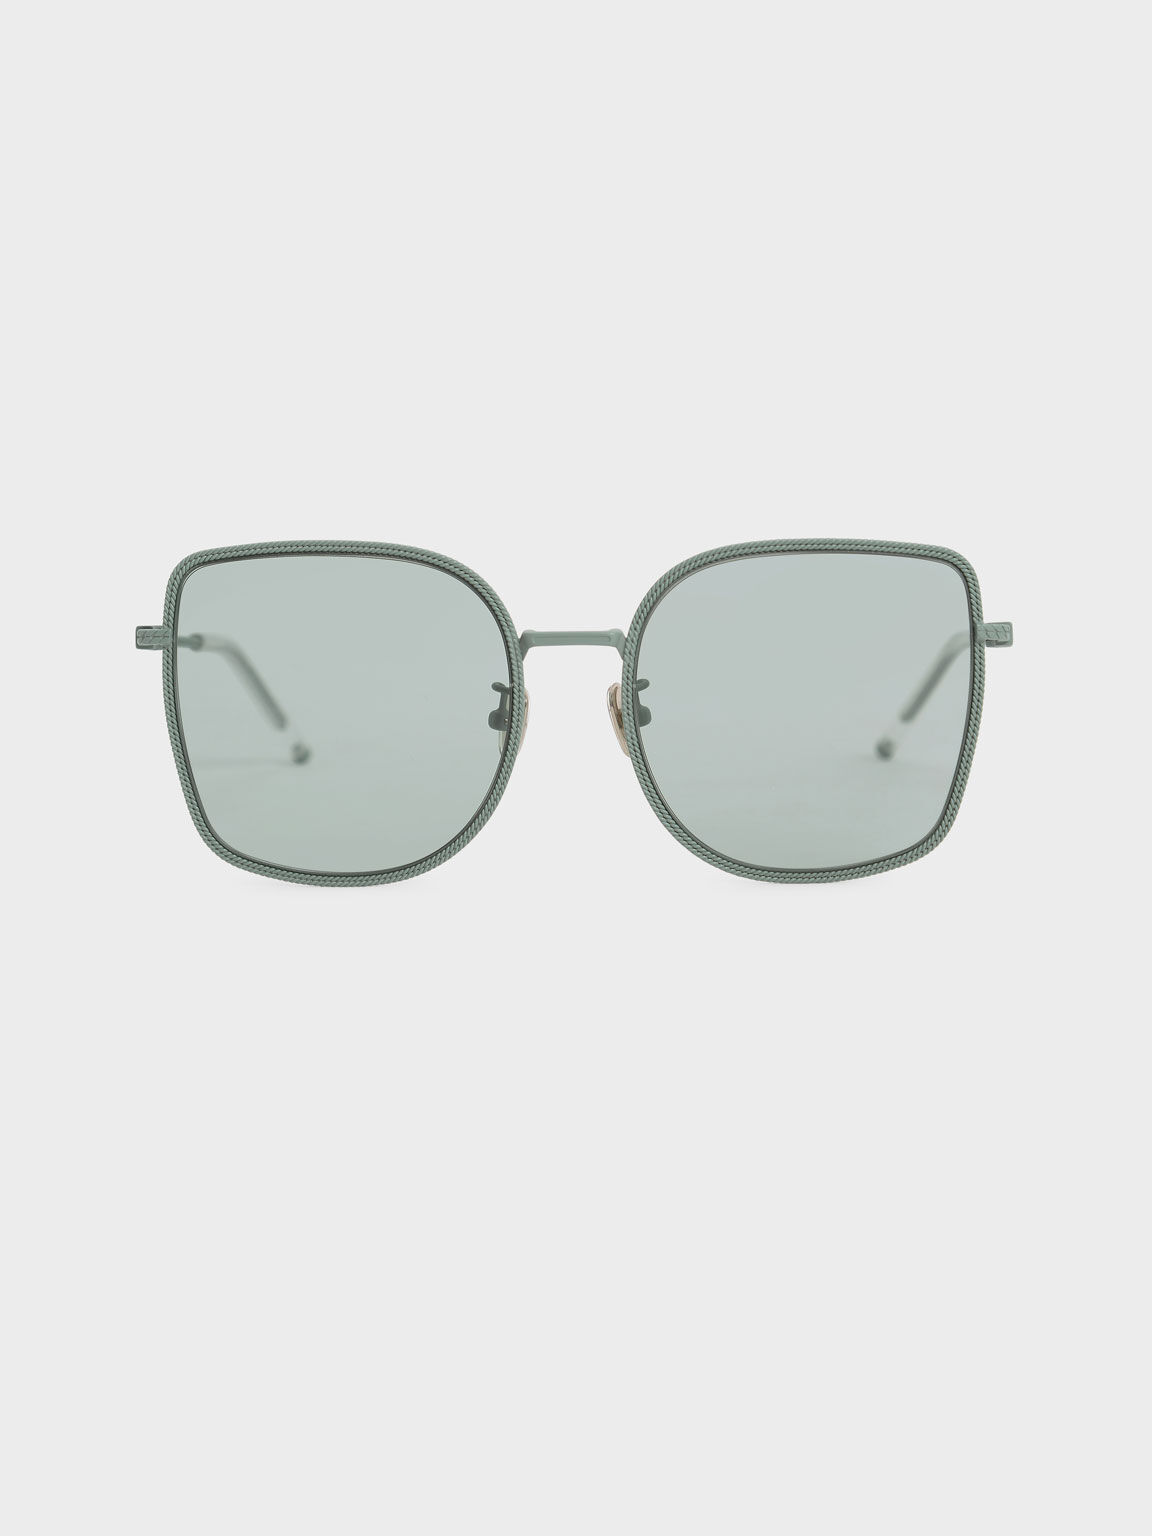 Geometric Butterfly Sunglasses, Green, hi-res